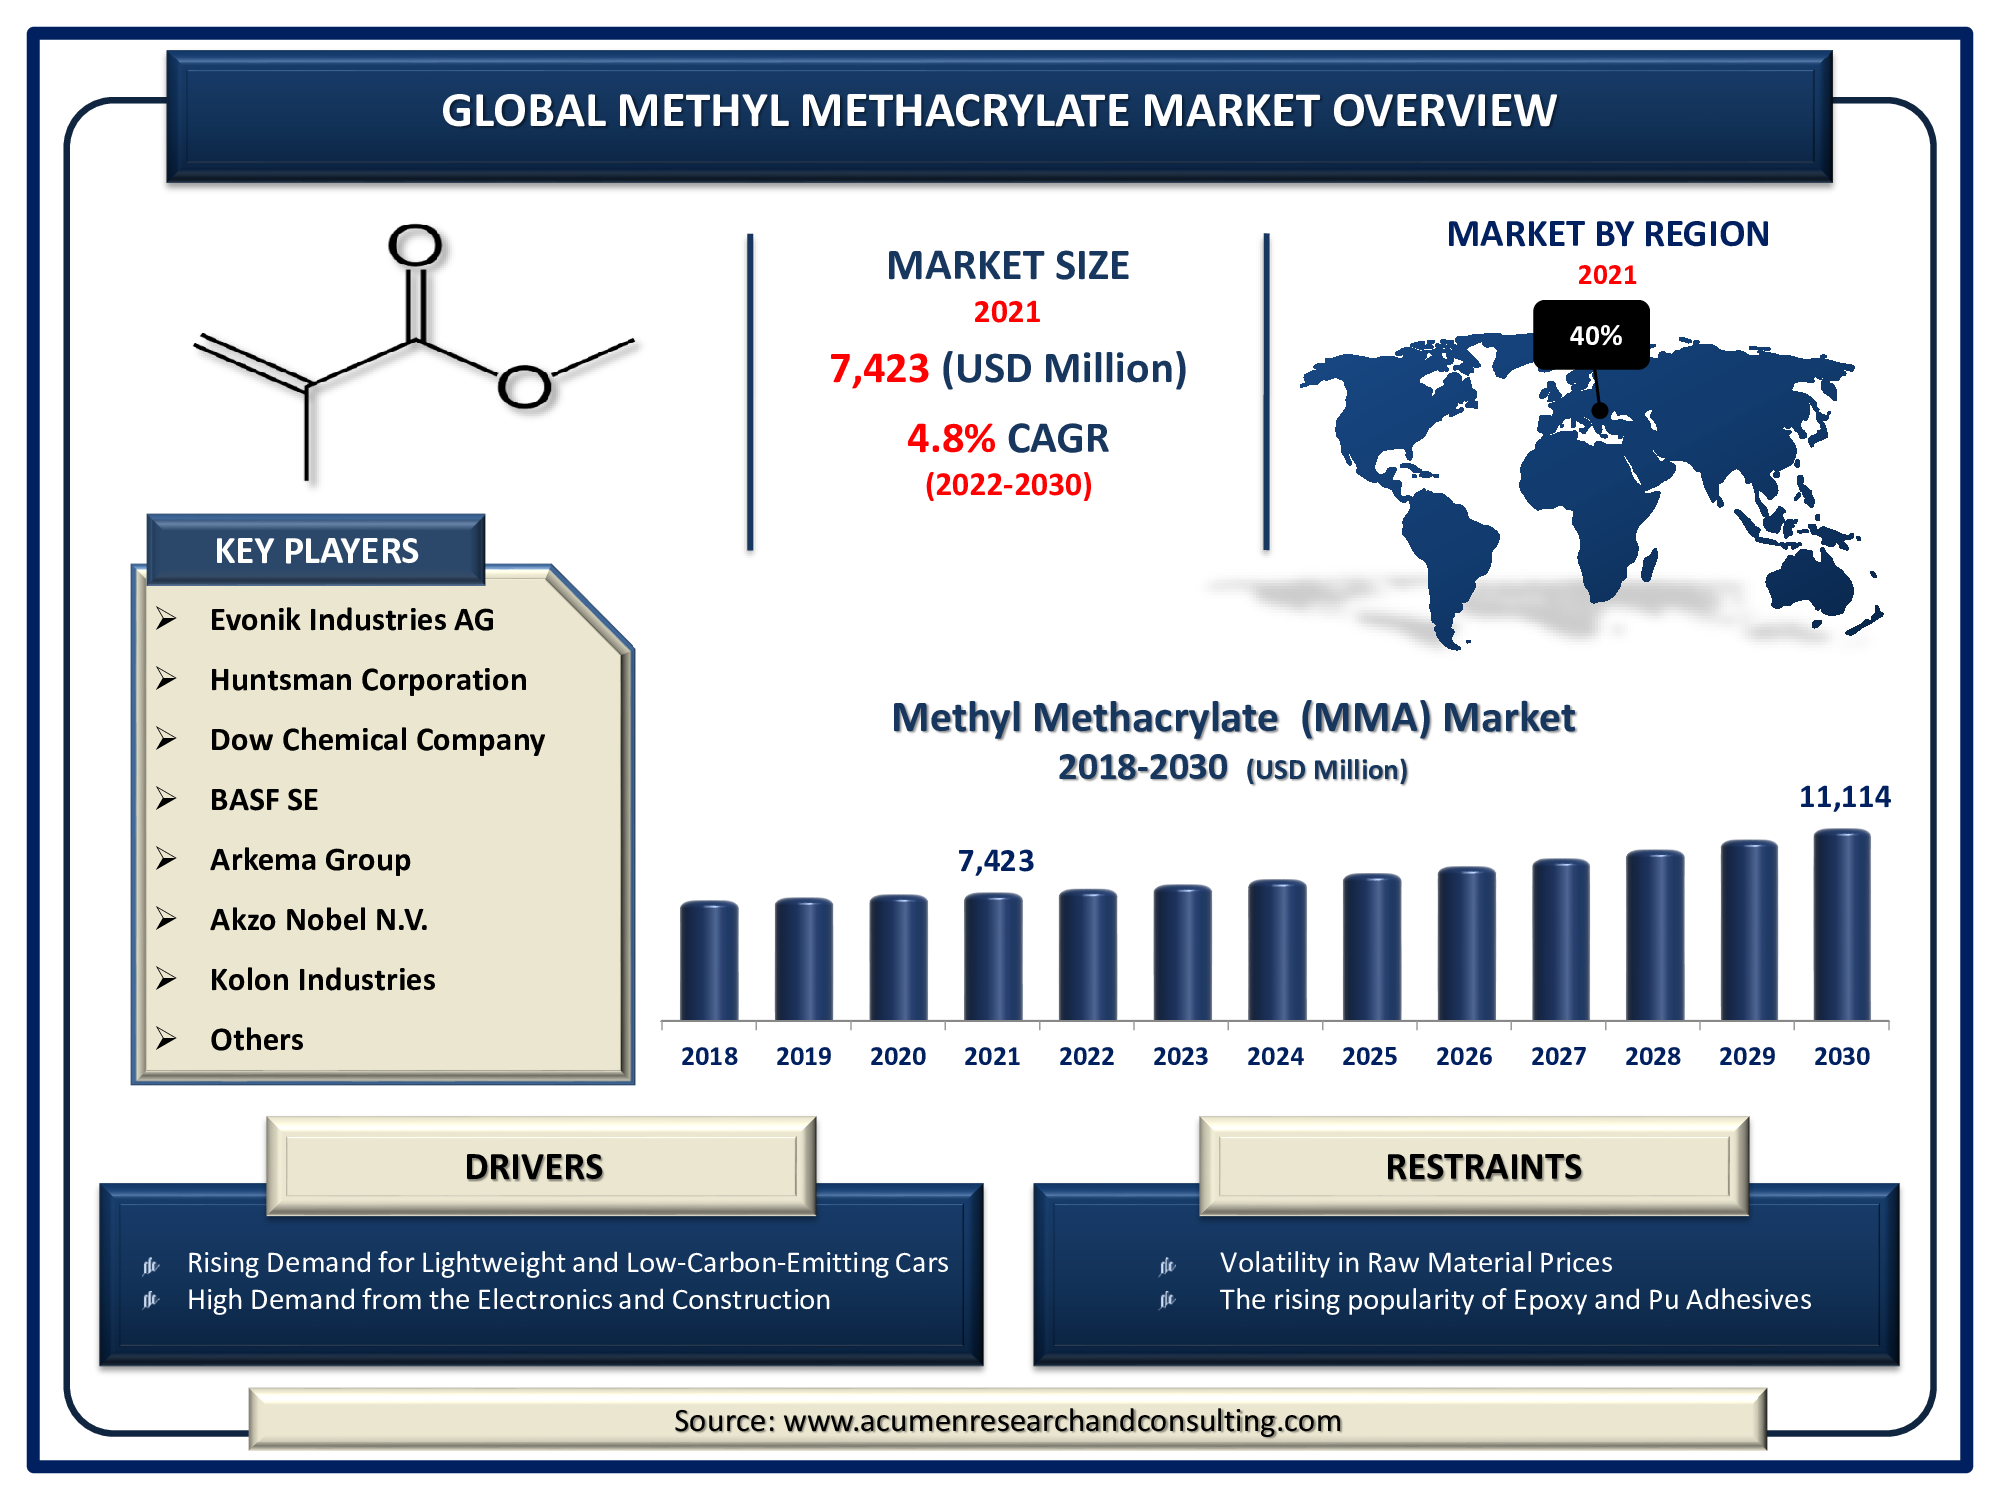 The Global Methyl Methacrylate Market Size was valued at USD 7,423 Million in 2021 and is predicted to be worth USD 11,114 Million by 2030, with a CAGR of 4.8% from 2022 to 2030.